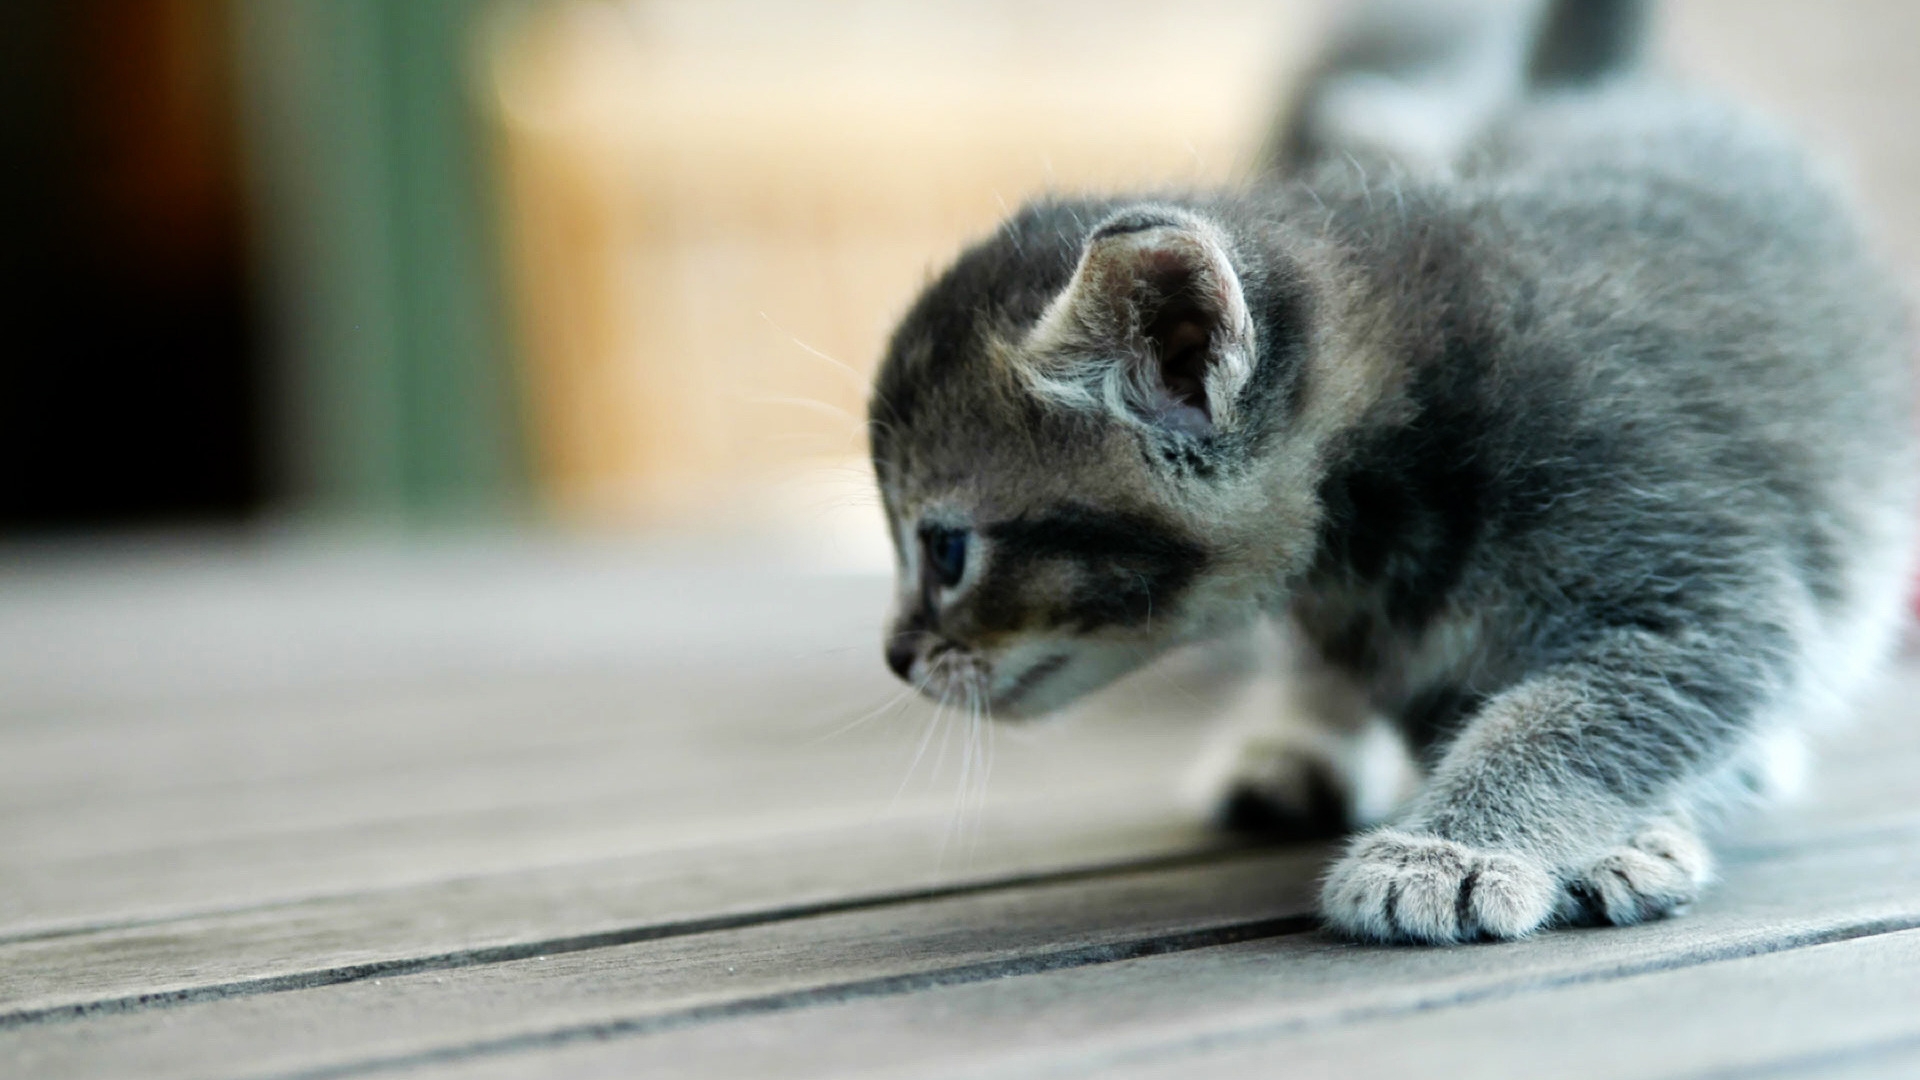 Small kitty for 1920 x 1080 HDTV 1080p resolution